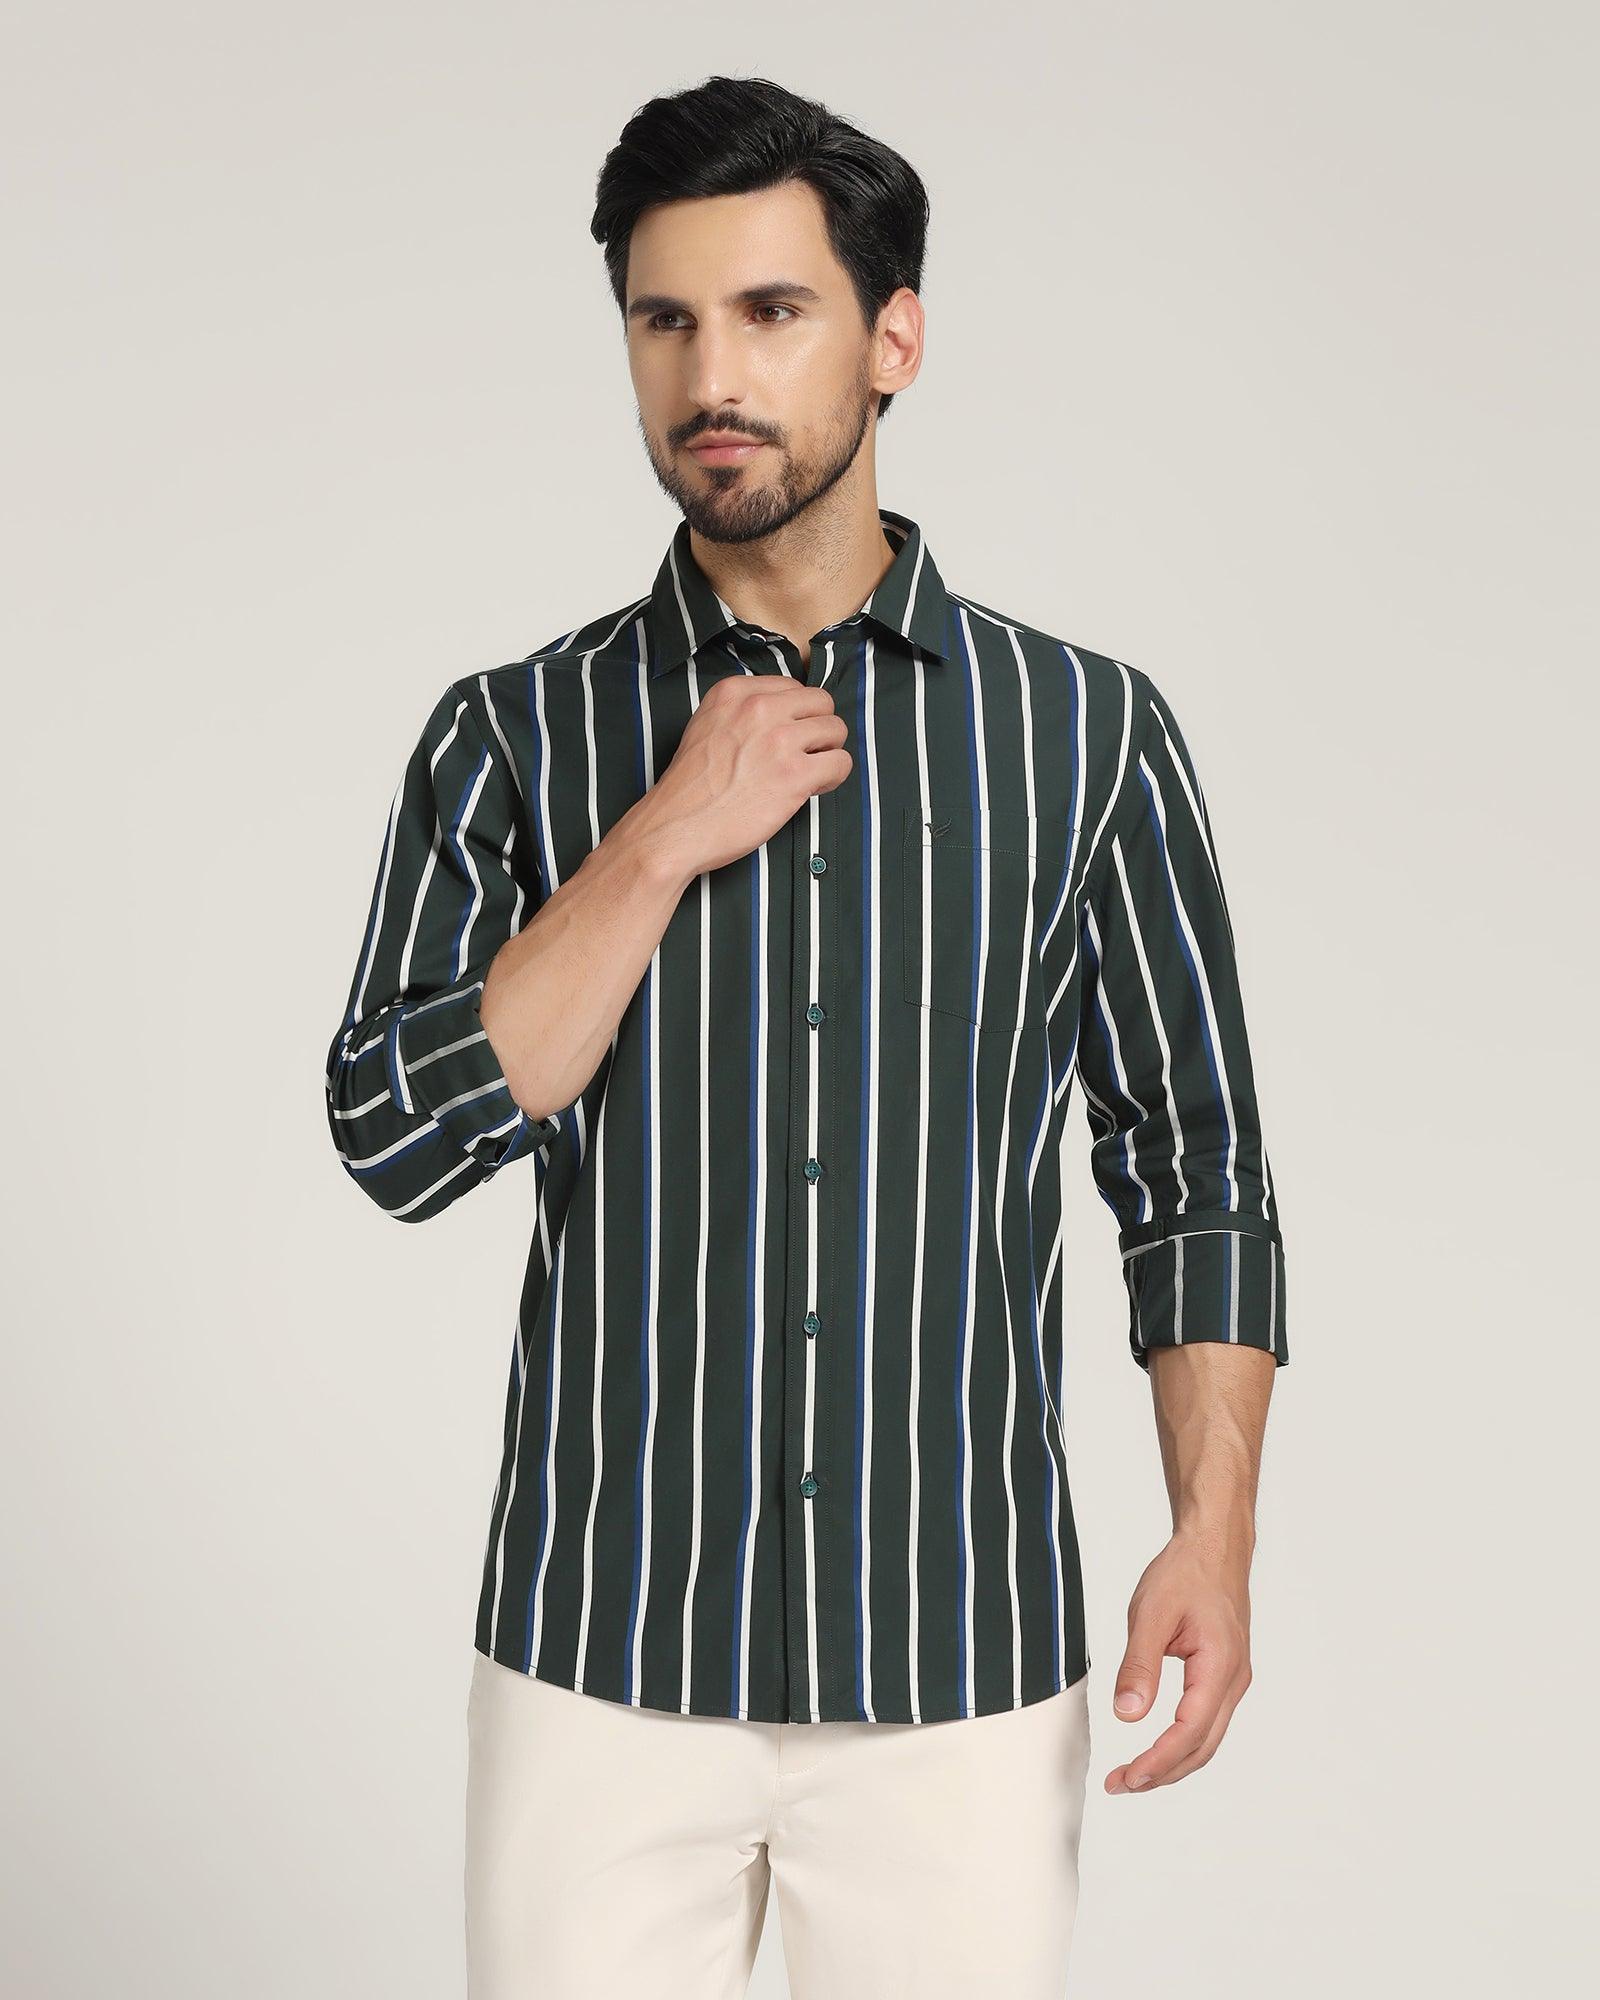 Green Stripes Dress Shirts  Green Stripes With White Collar And